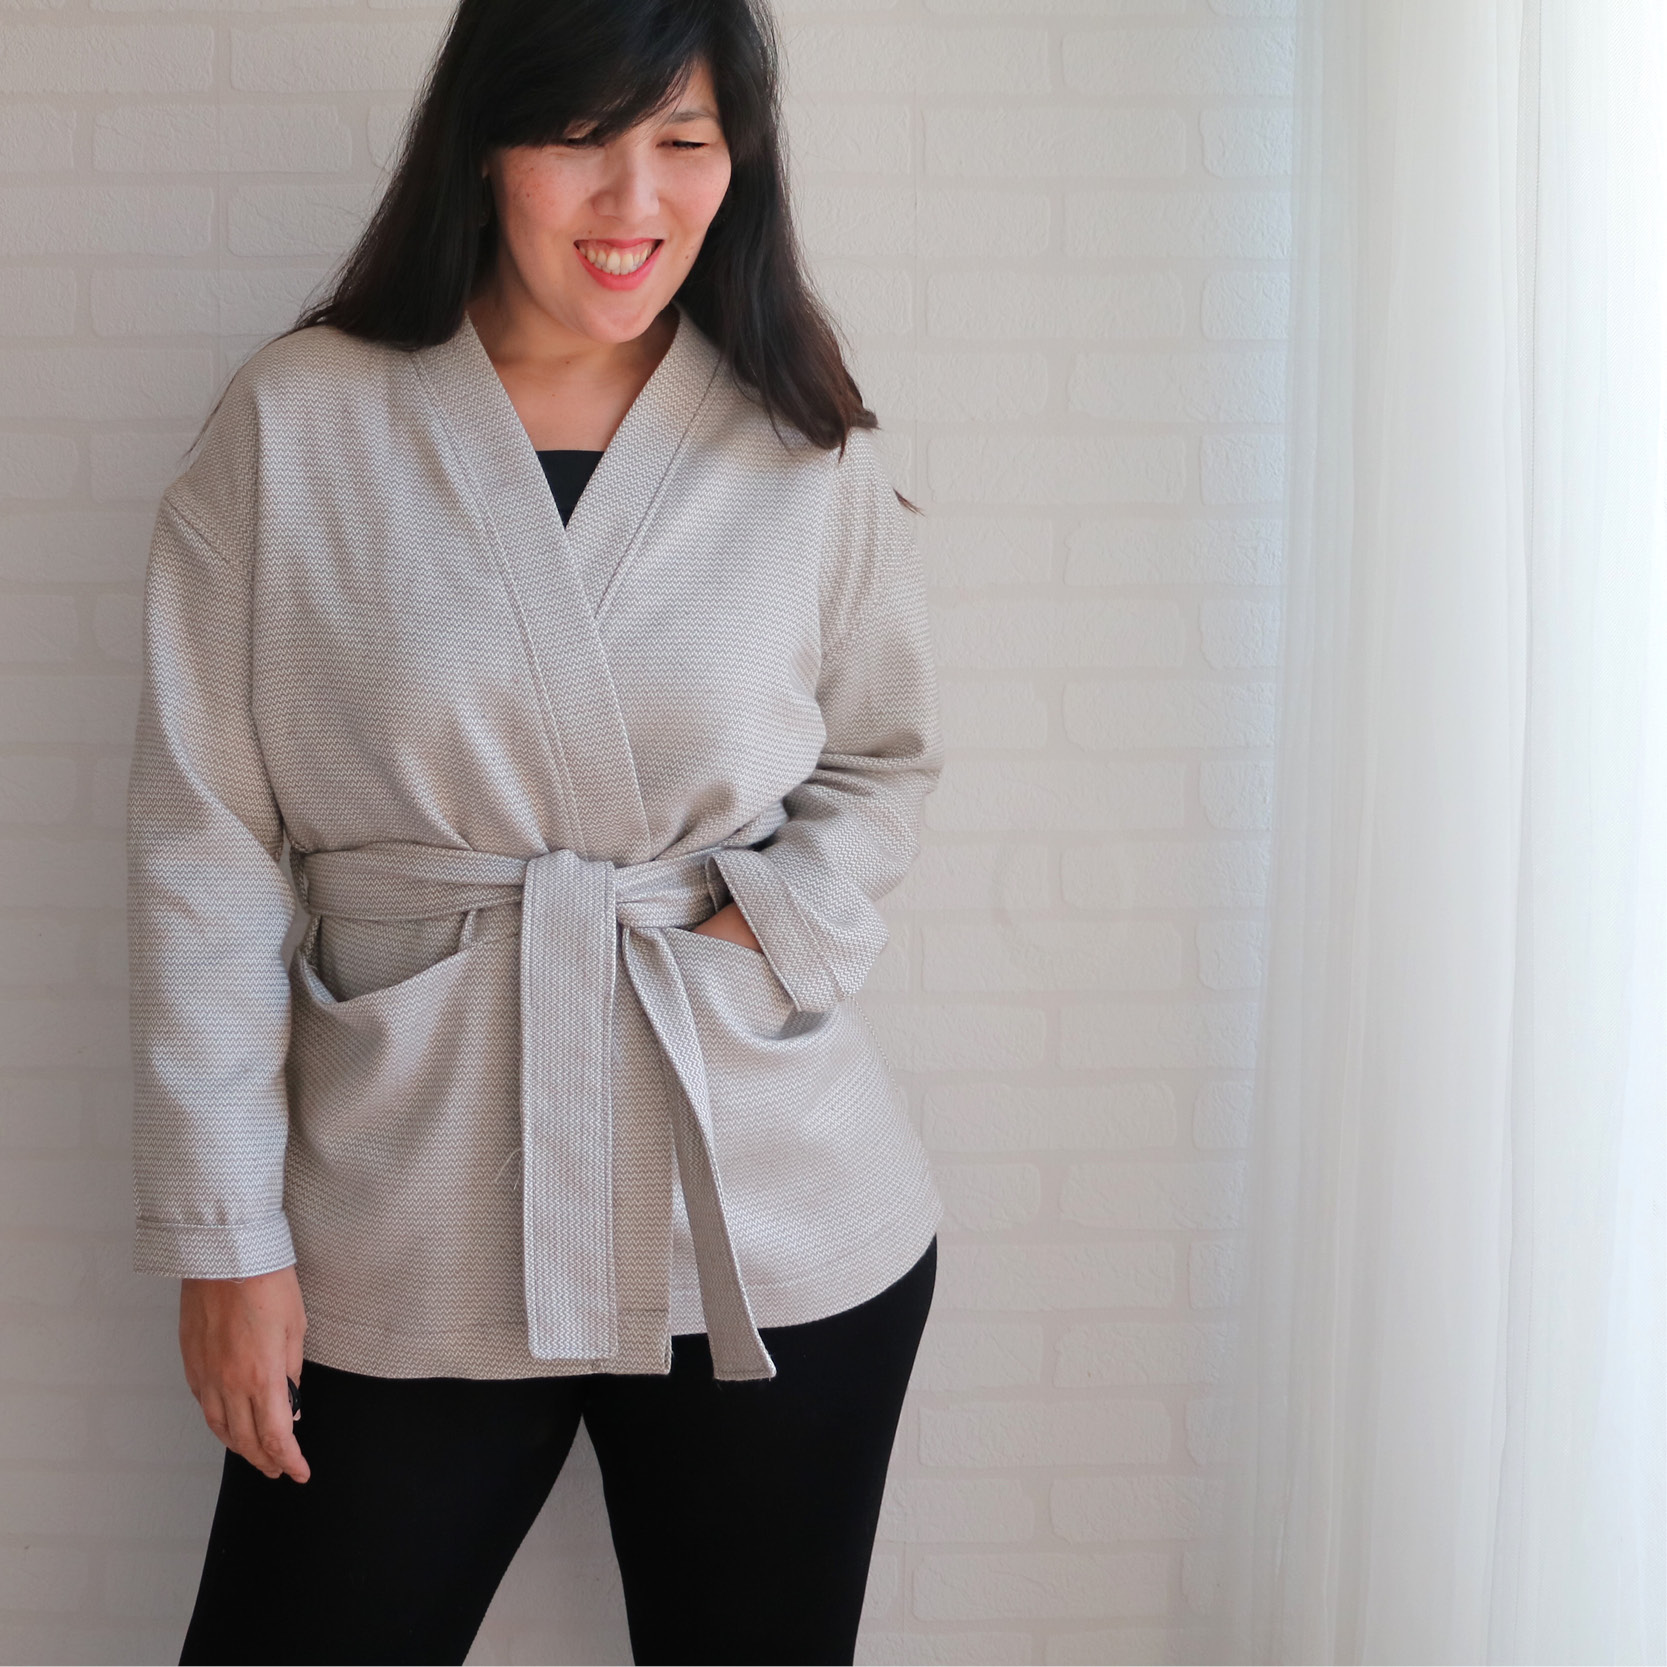 Woman wearing the Komi Jacket sewing pattern from Wardrobe by Me on The Fold Line. A wrap jacket pattern made in medium weight woven or jersey, featuring deep pockets, wrap front held in place by a belt and dropped shoulders with cuff at the hem.